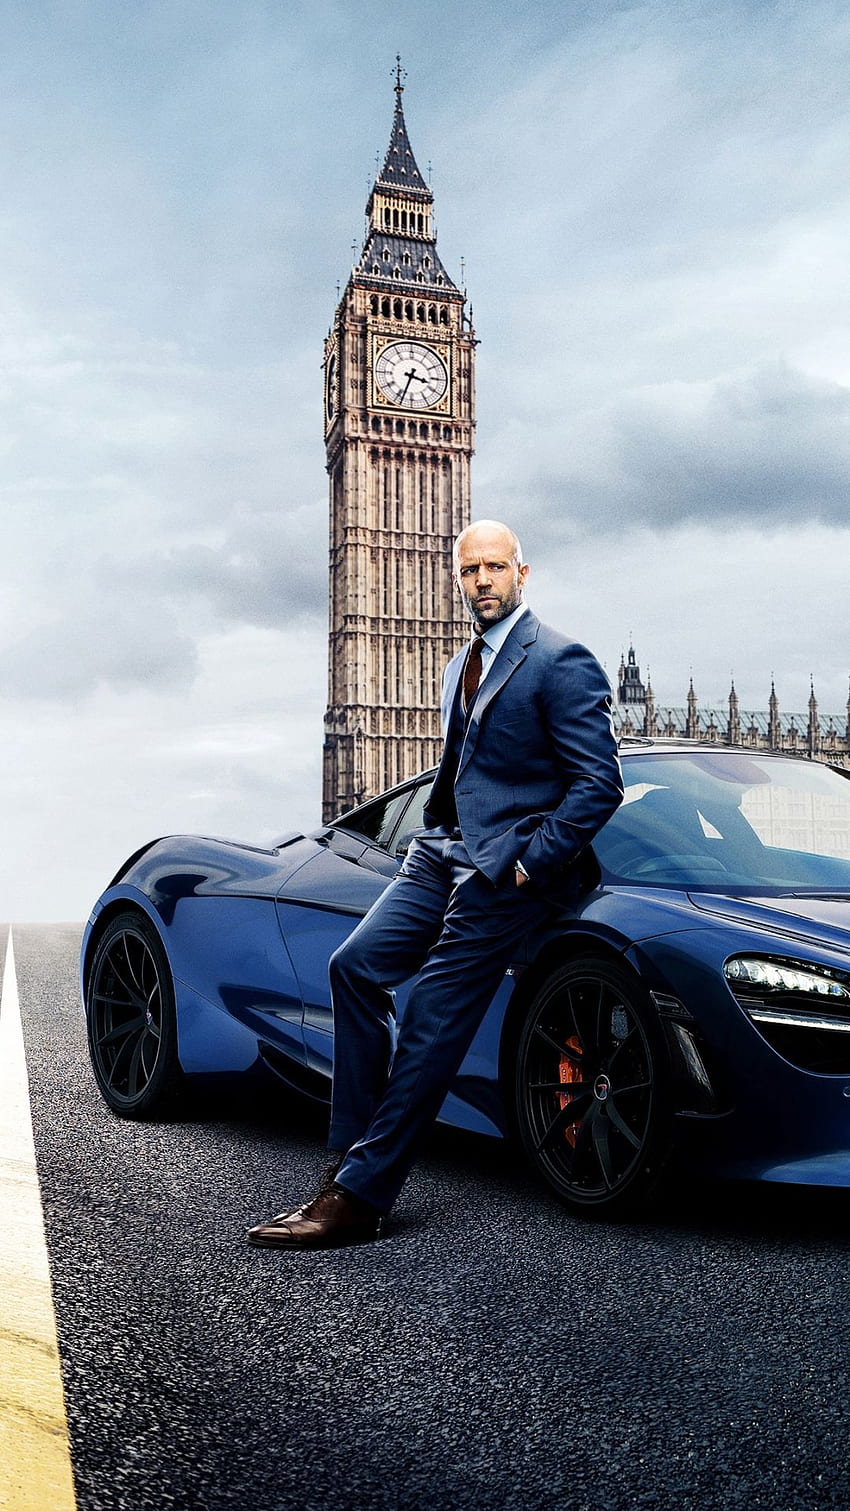 First Look: Hobbs and Shaw With Dwayne Johnson and Roman Reigns